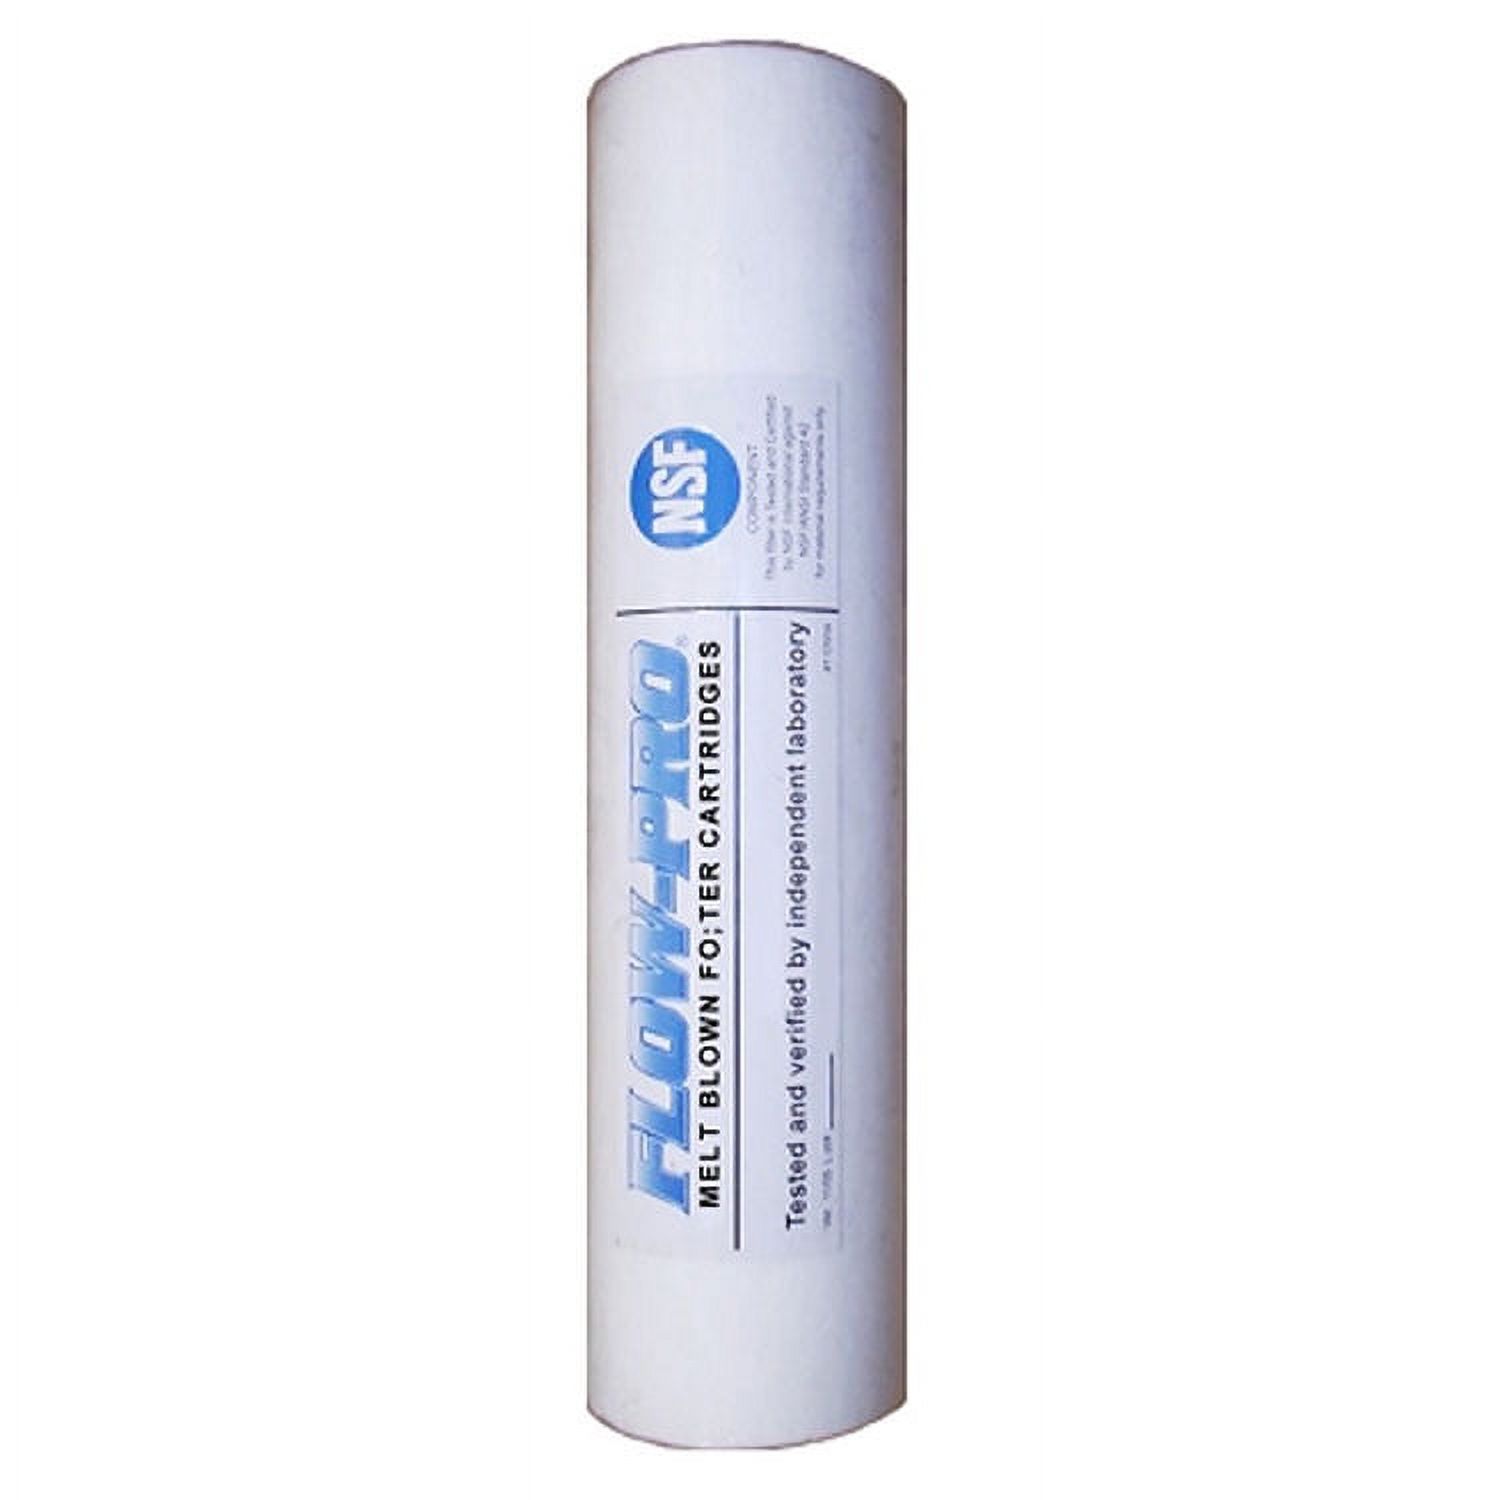 Watts FPMB5-978 Flo-Pro Replacement Filter Cartridge - image 1 of 1